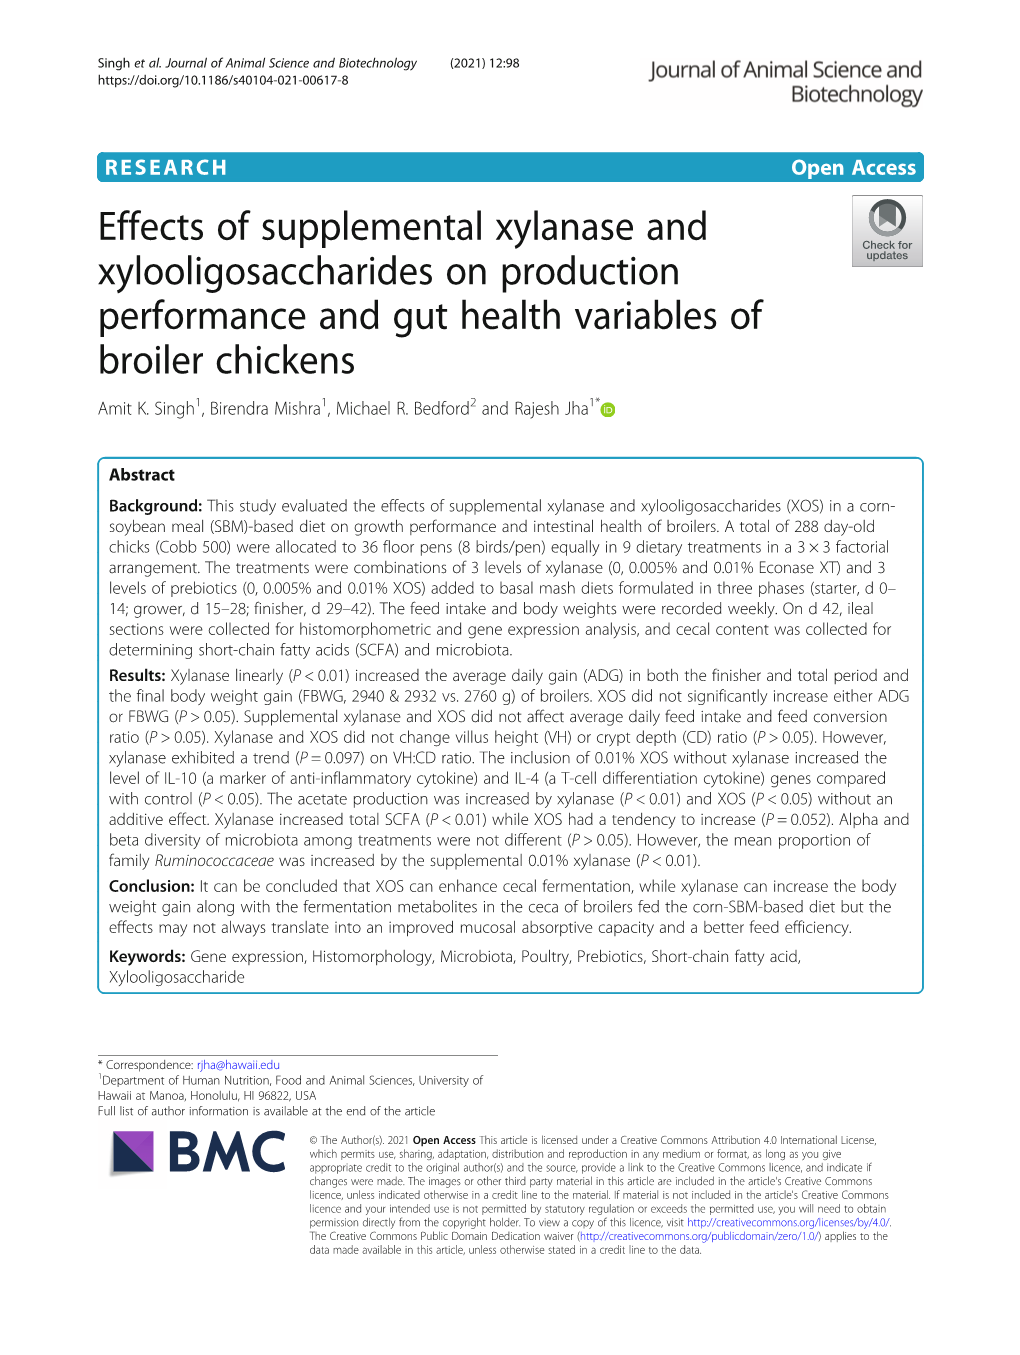 Effects of Supplemental Xylanase and Xylooligosaccharides on Production Performance and Gut Health Variables of Broiler Chickens Amit K